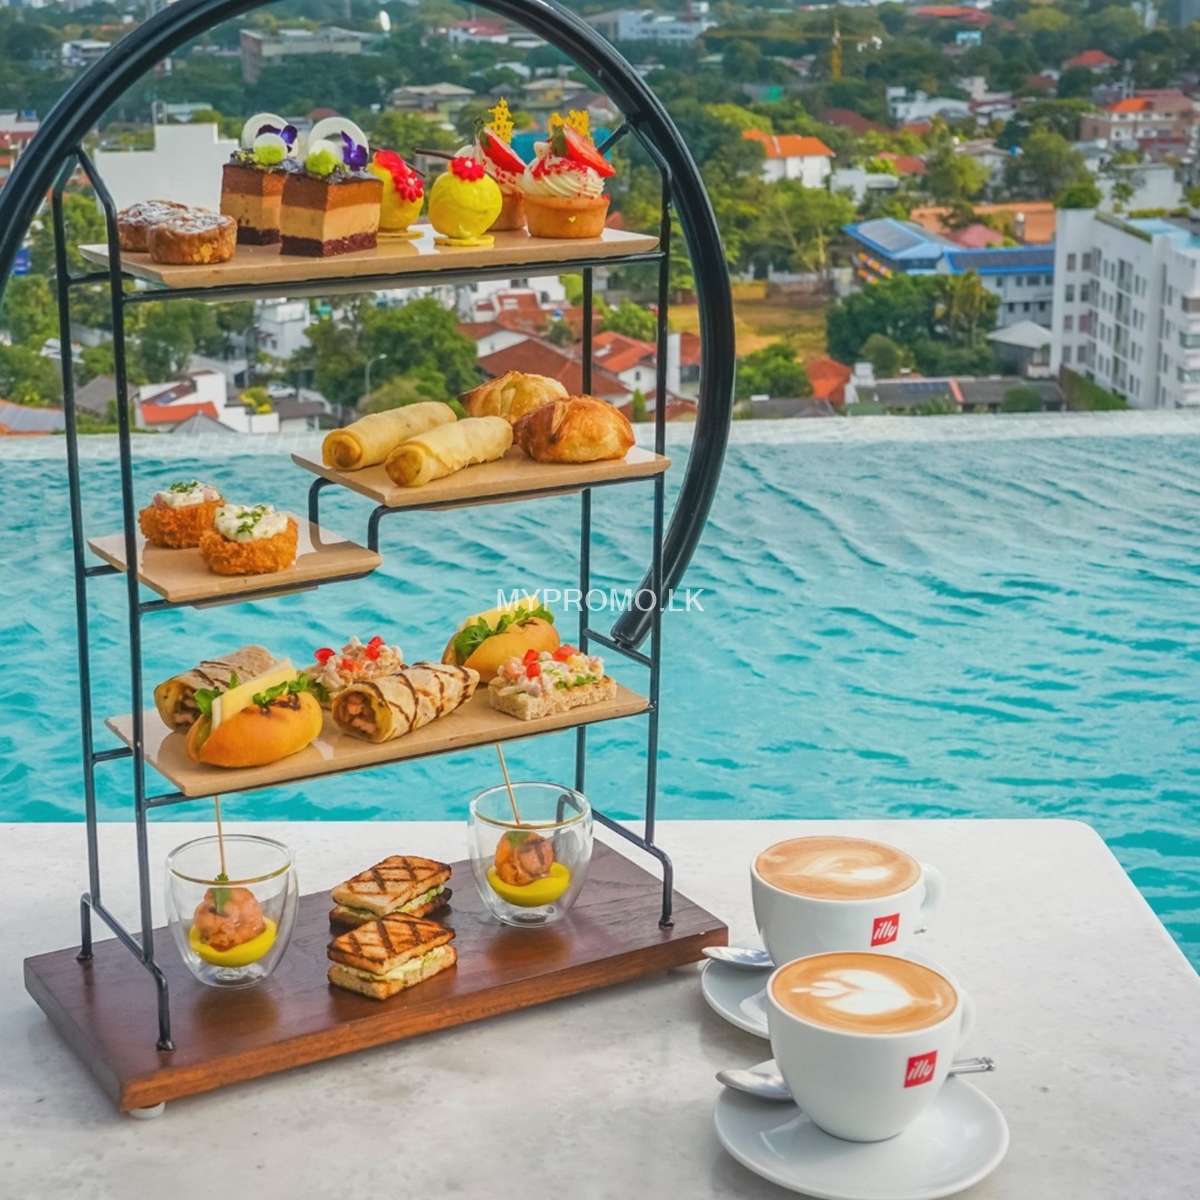 Afternoon tea at Ward 7, Jetwing Colombo Seven